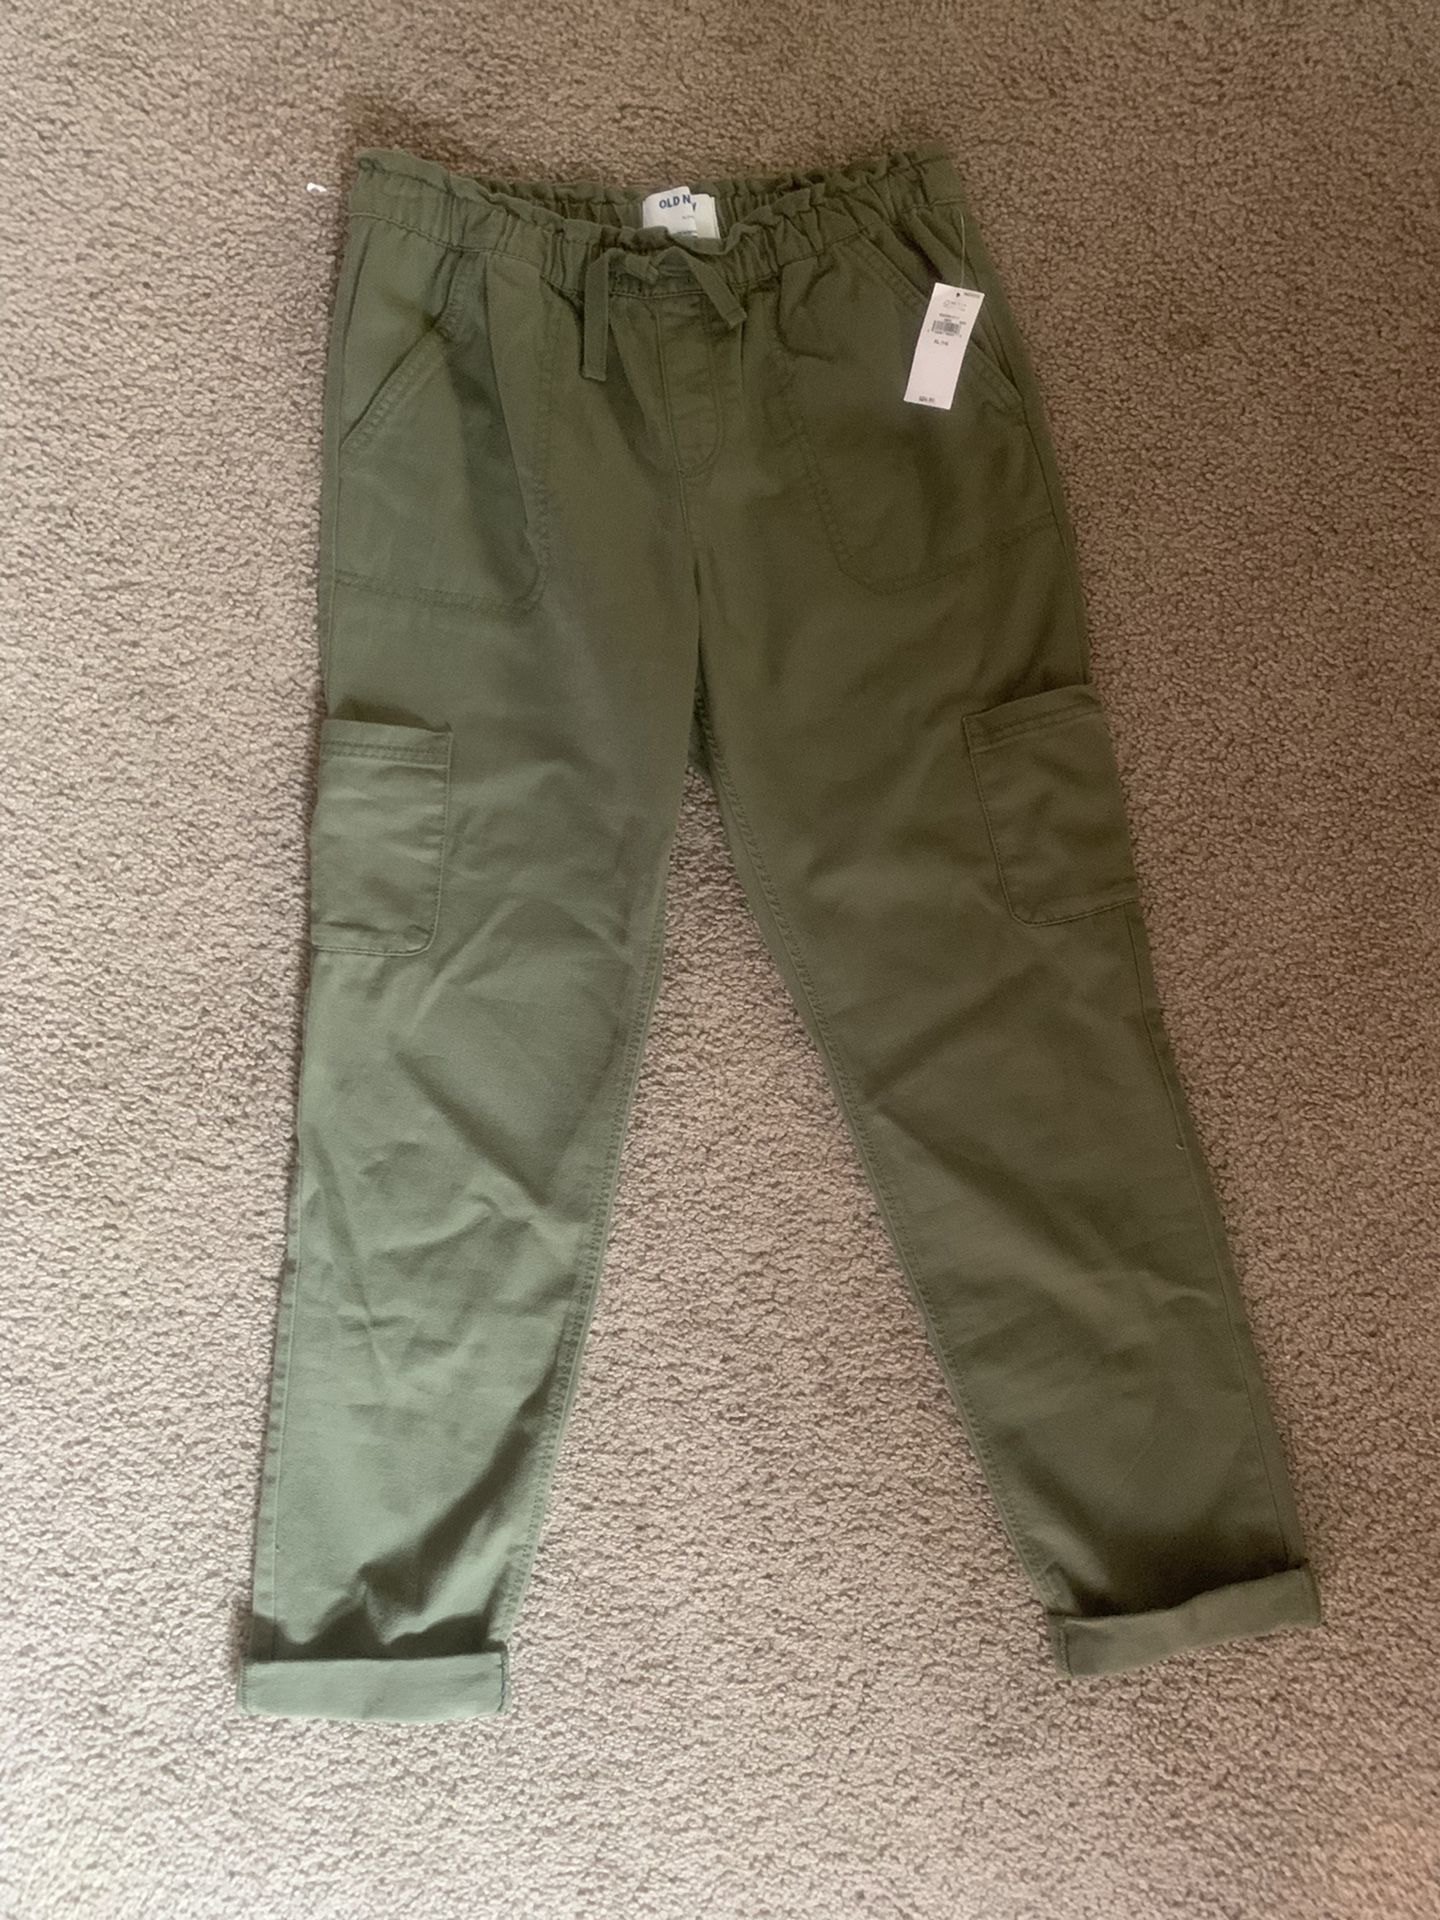 girls size 14 old navy pants